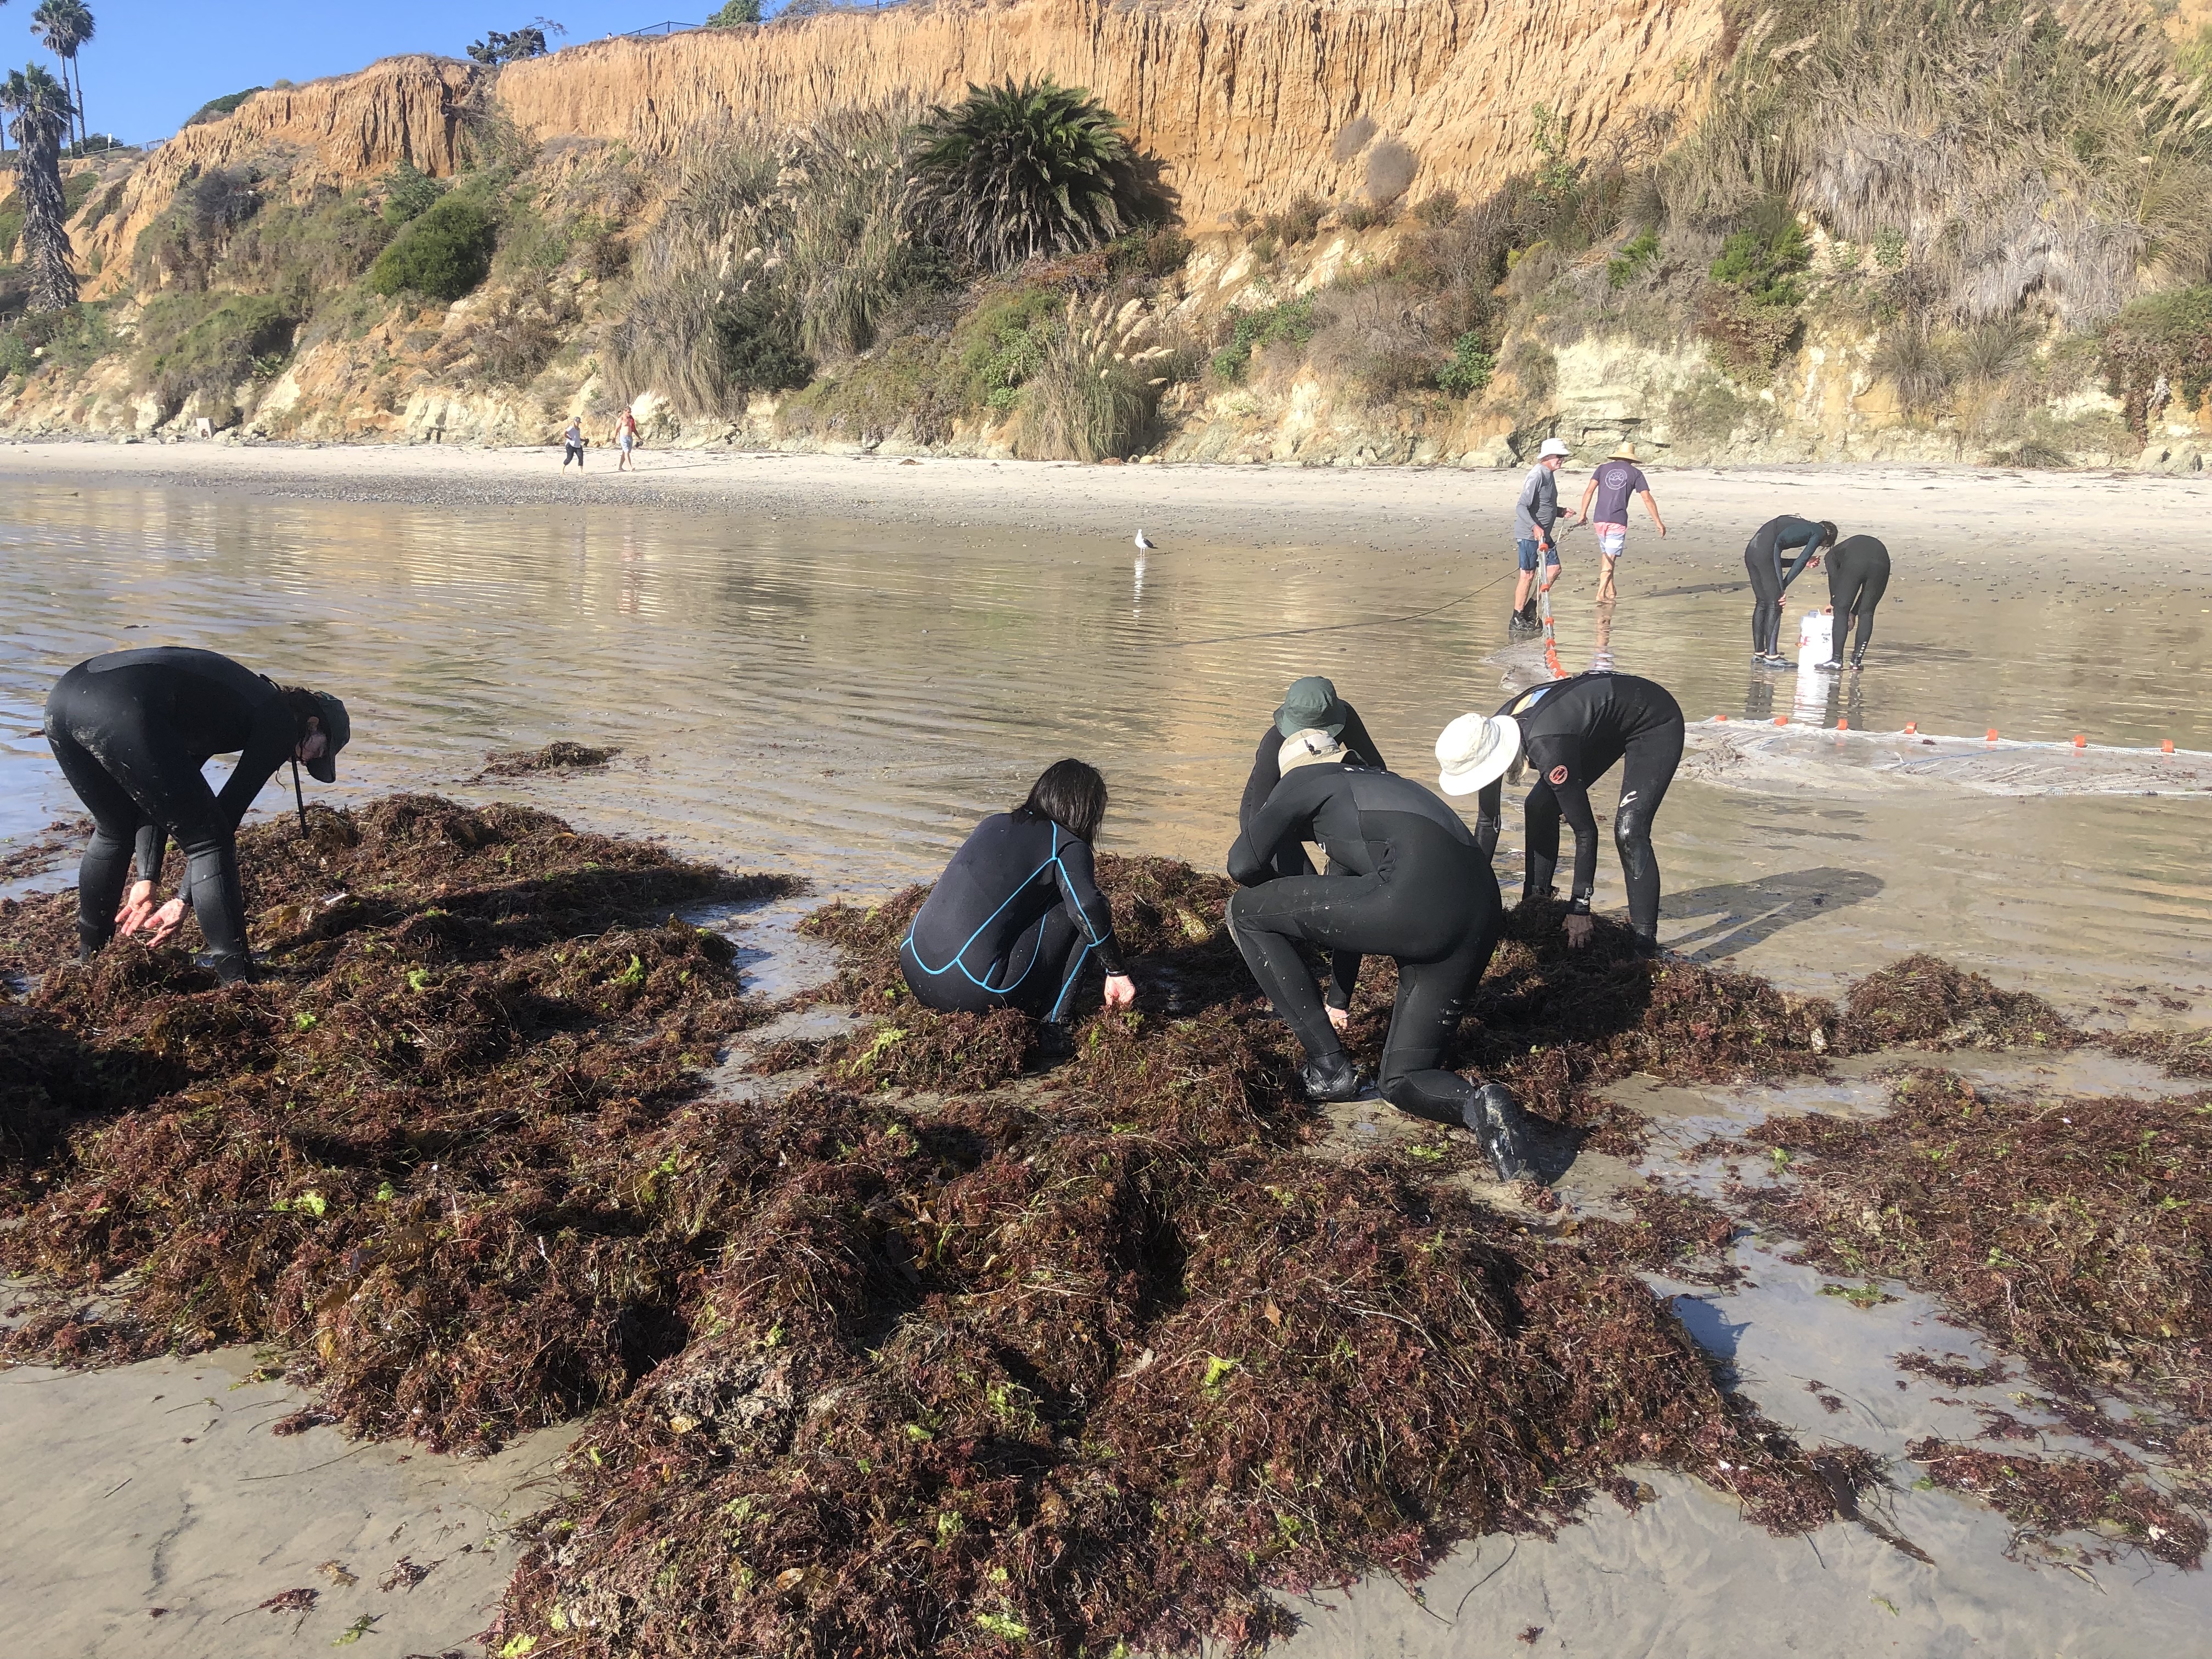 The team collects data from seaweed on the beach.